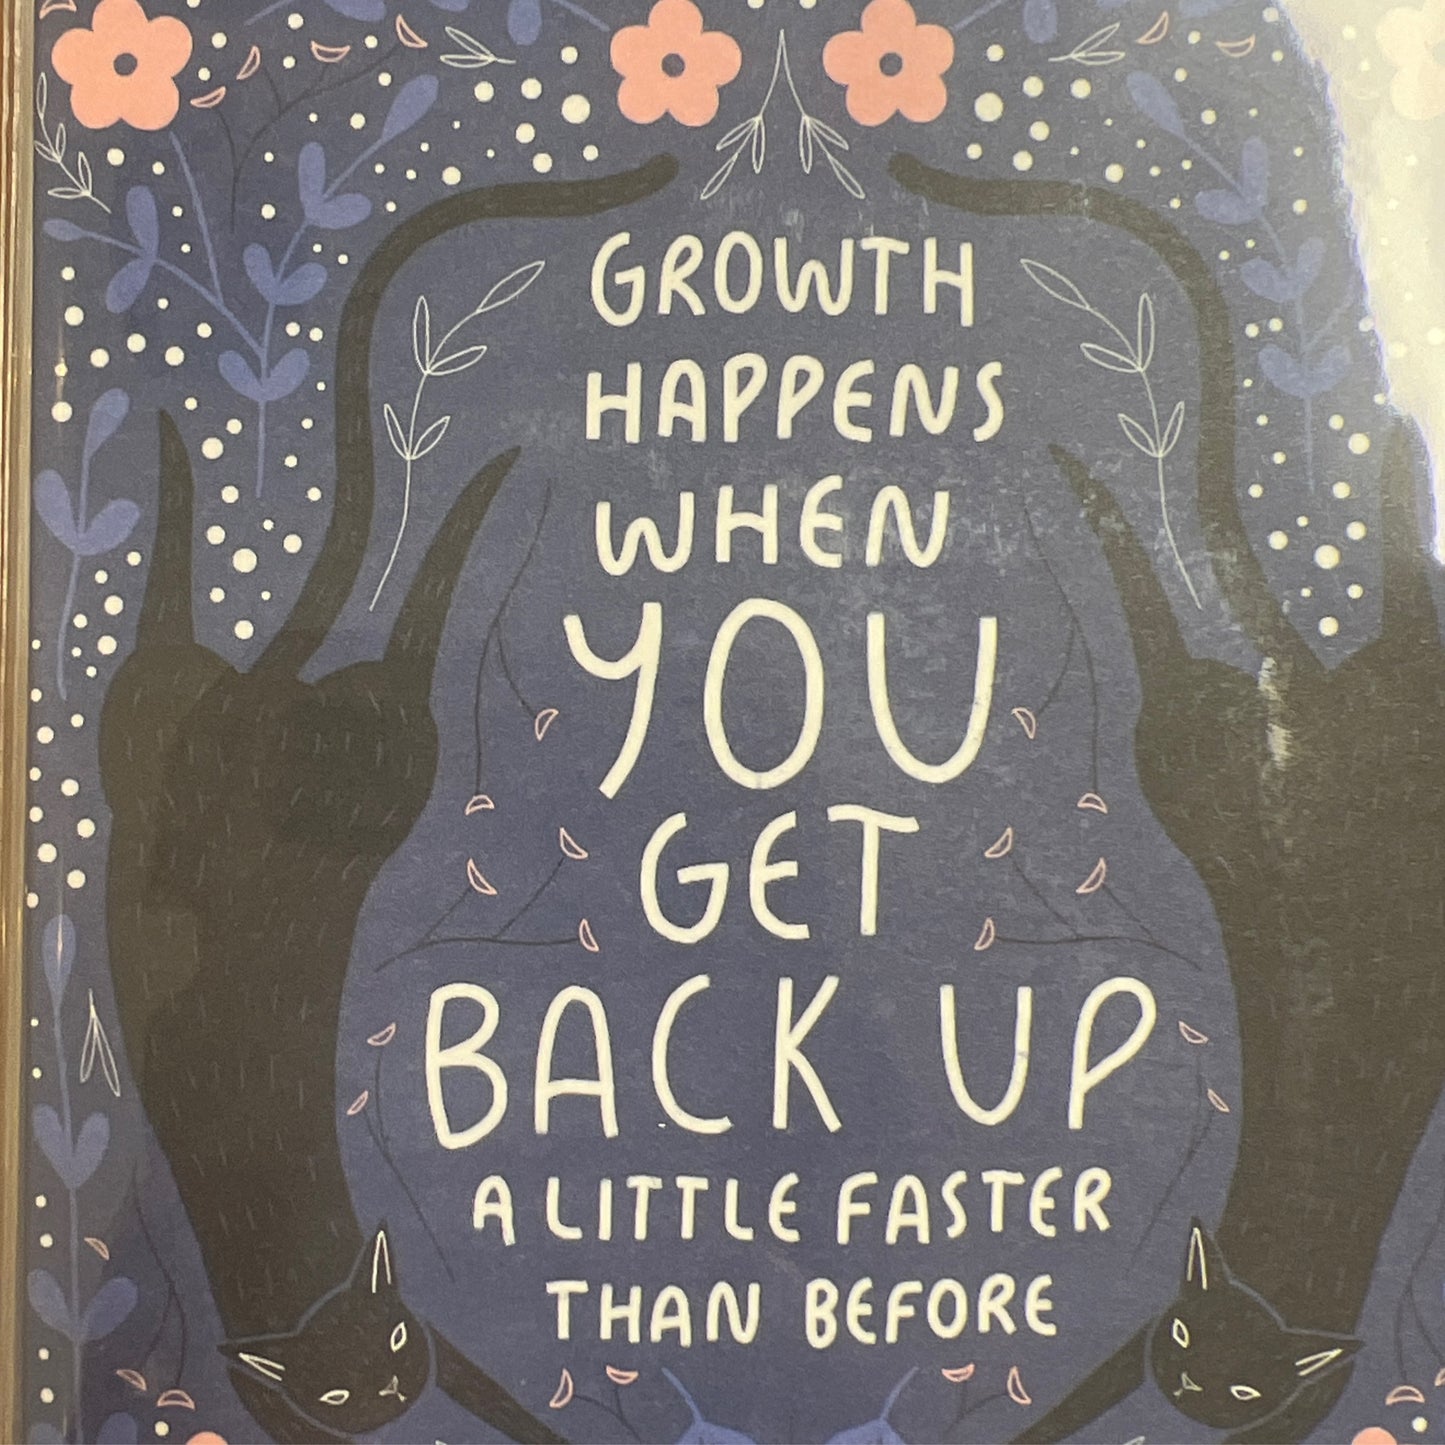 Growth happens when you get back up